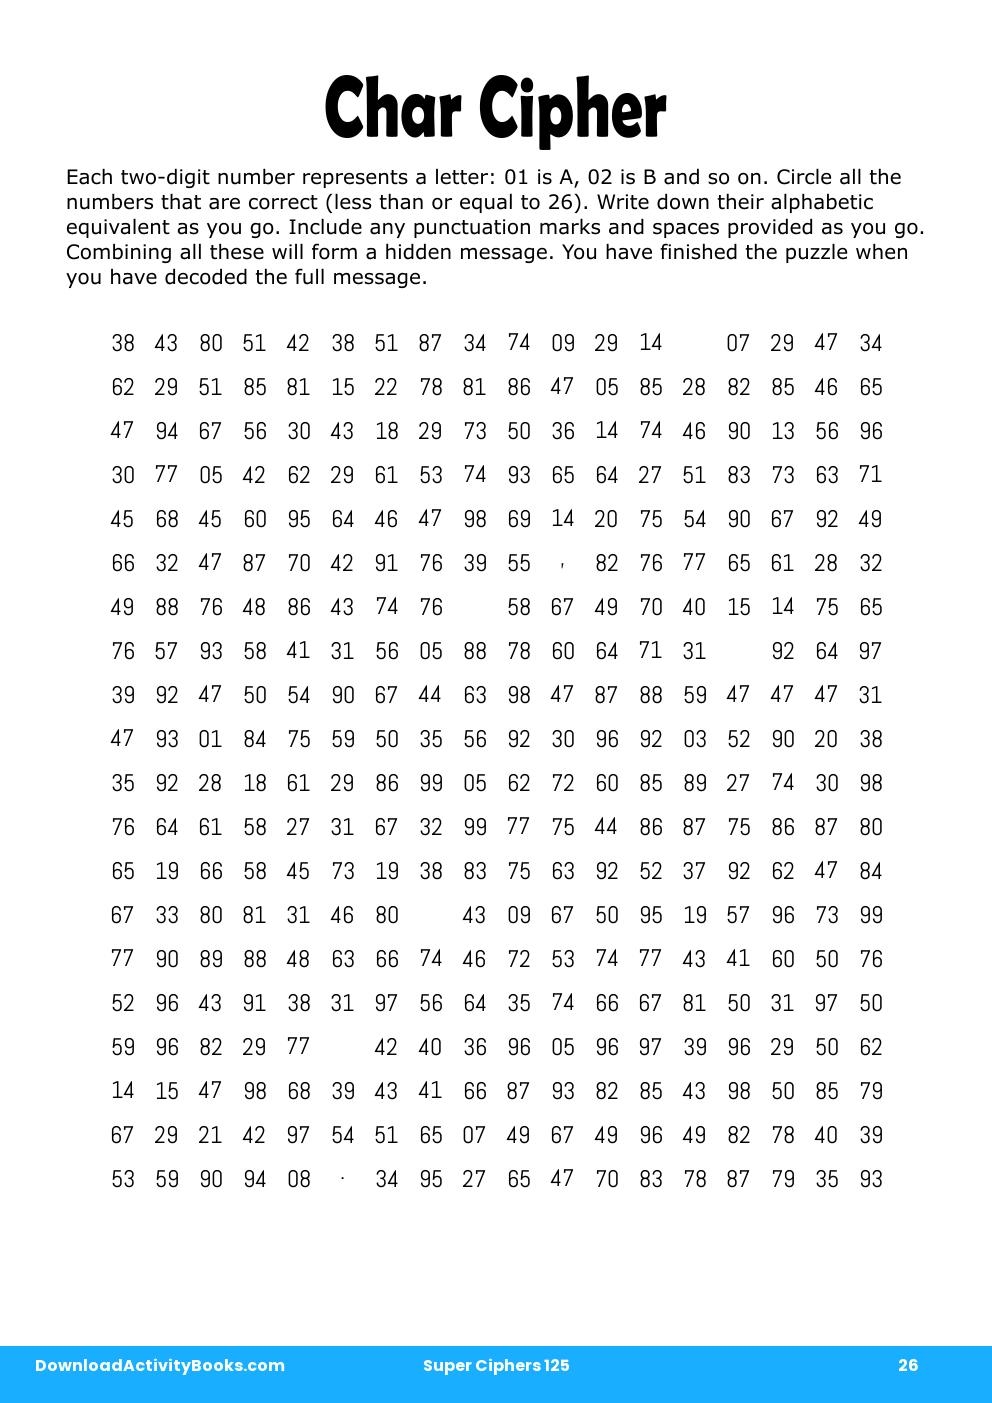 Char Cipher in Super Ciphers 125